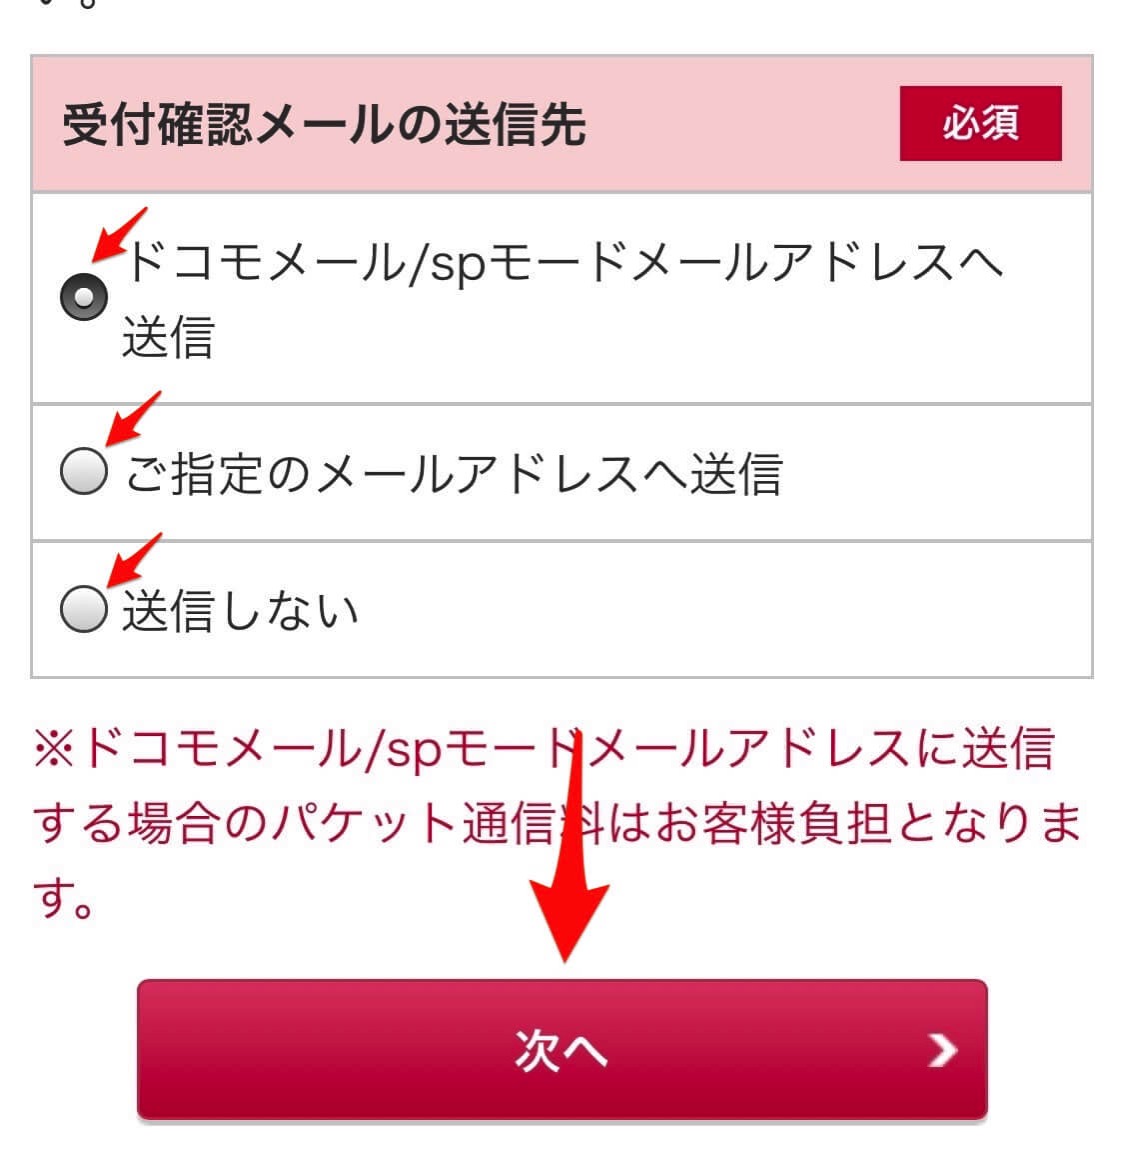 The docomo one number service cancellation of a contract 8